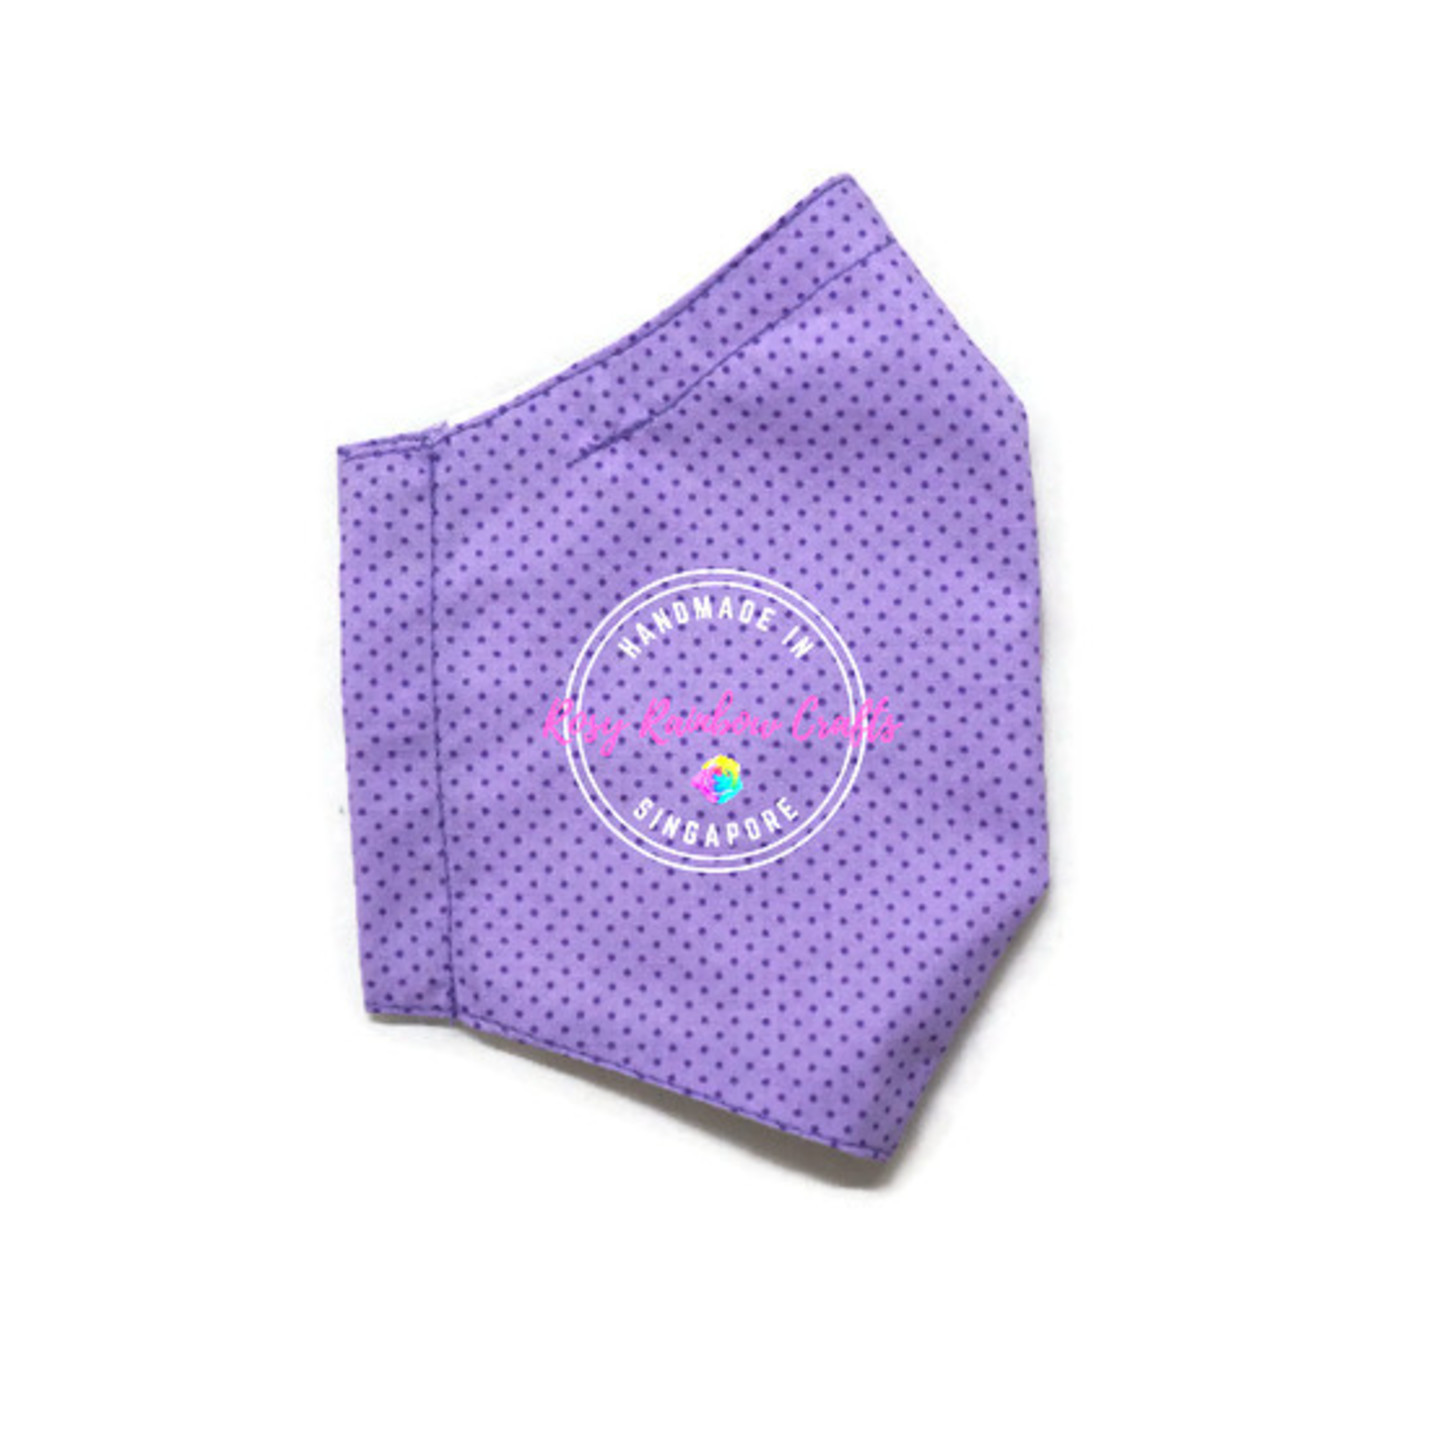 3D Seamless Mask Candy Purple Dots Medium 8-12 years old